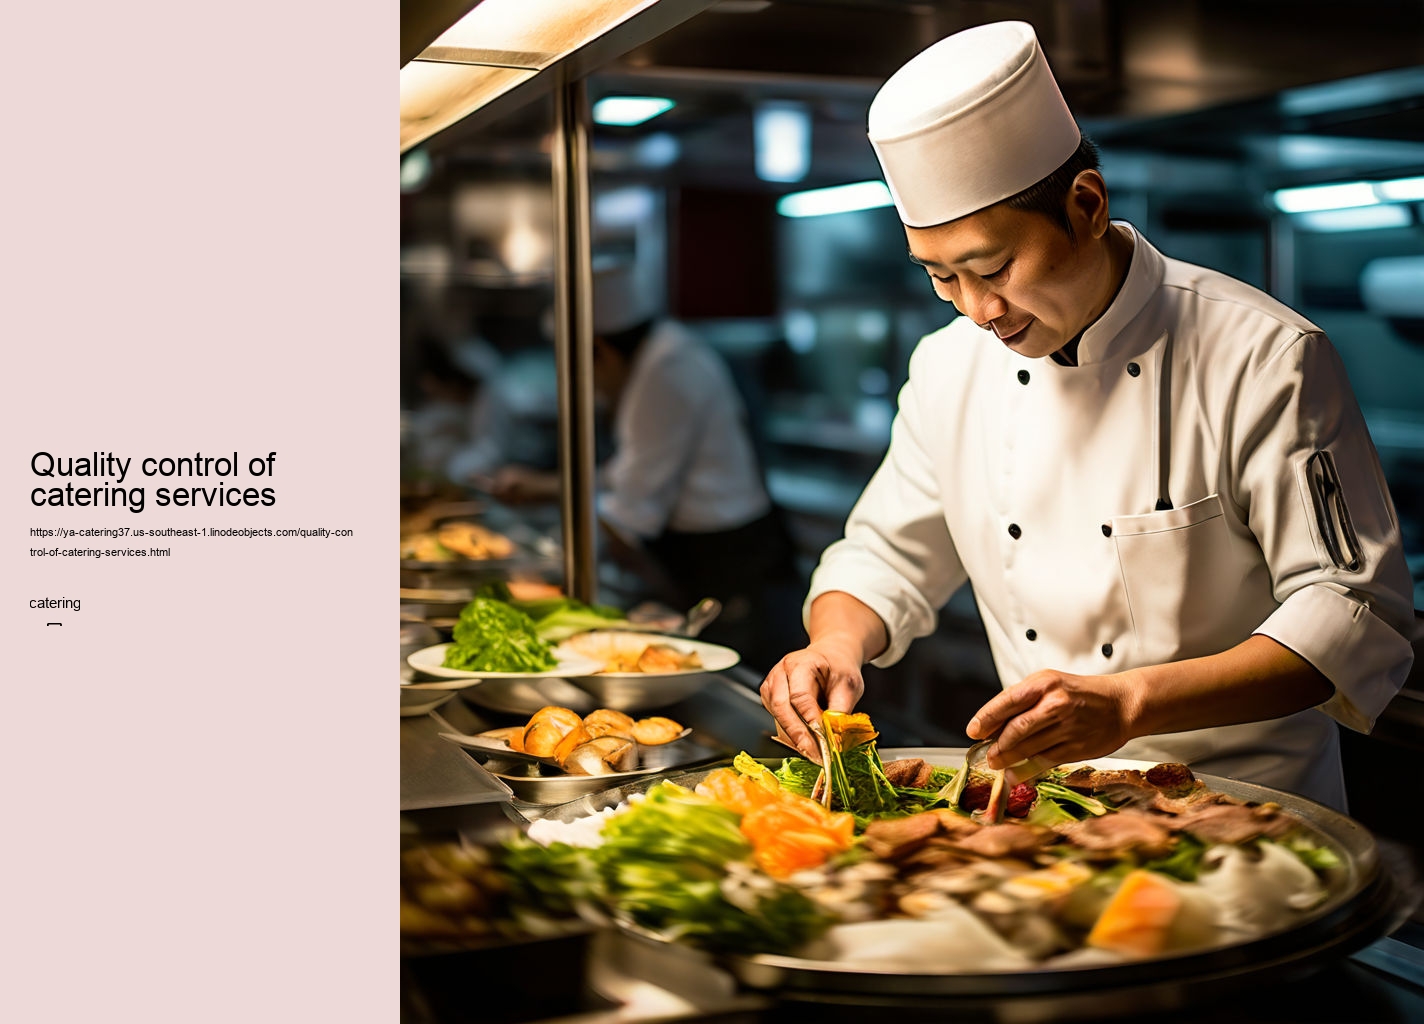 Quality control of catering services